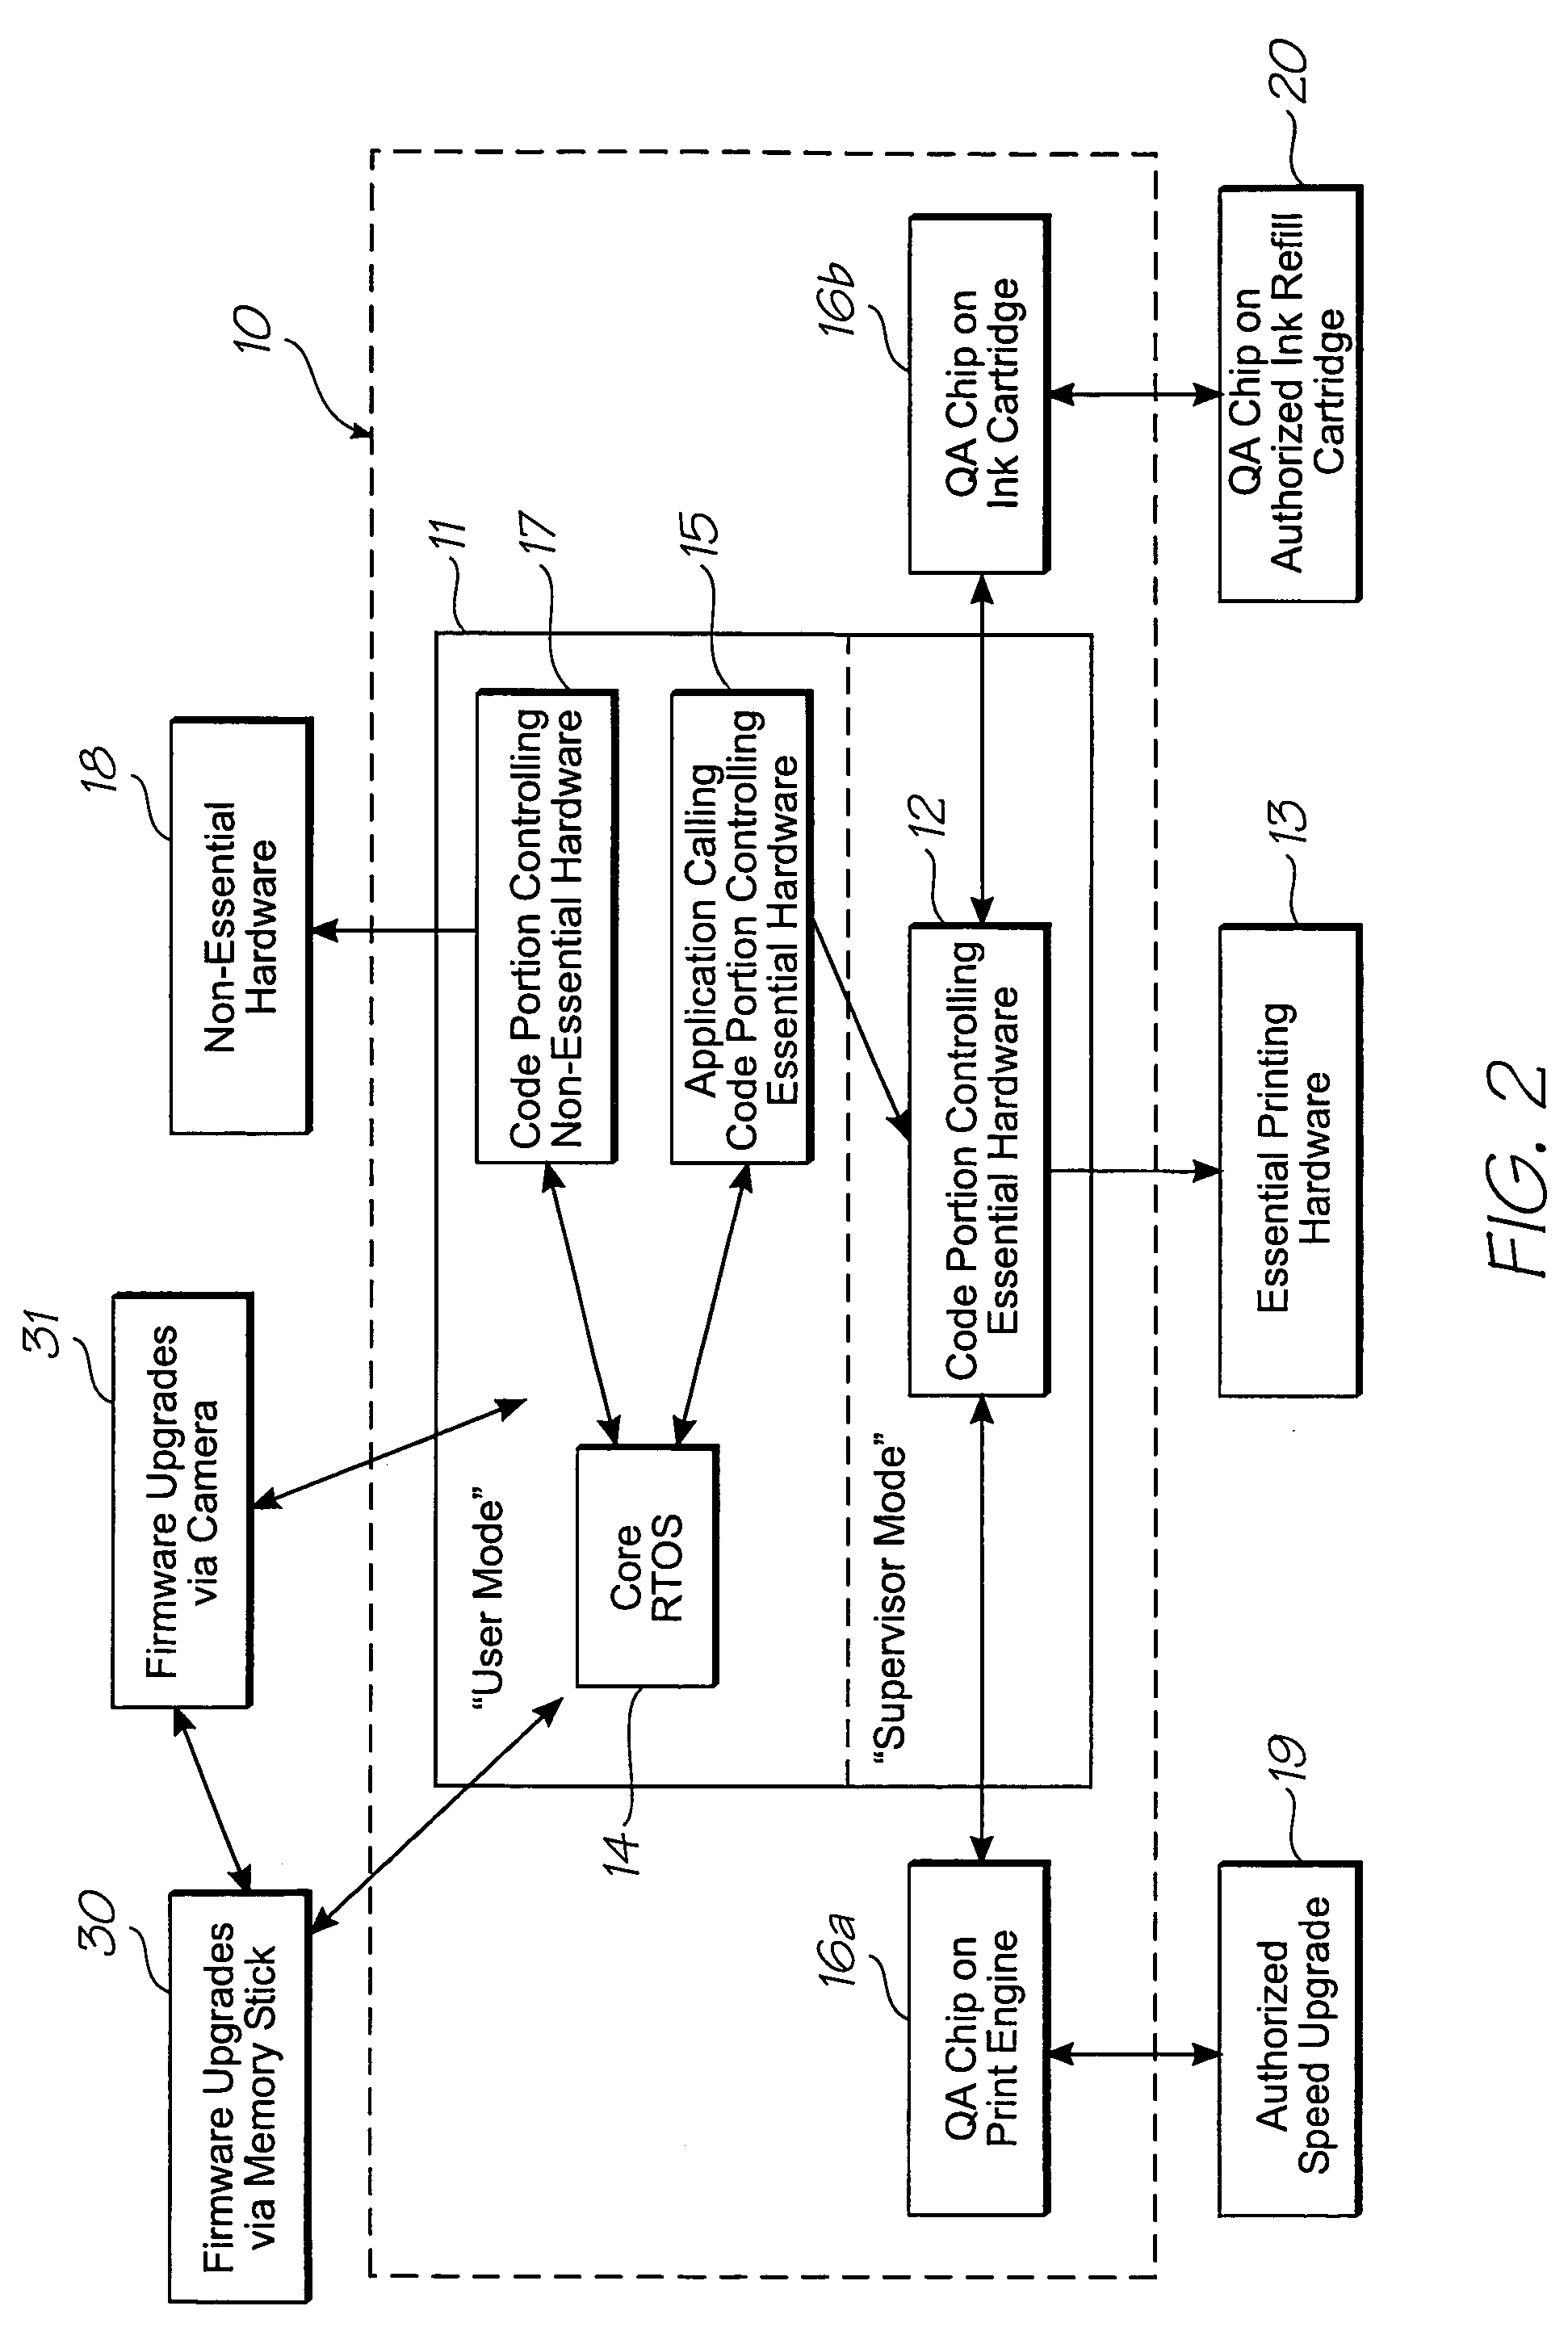 System for protecting sensitive data from user code in register window architecture